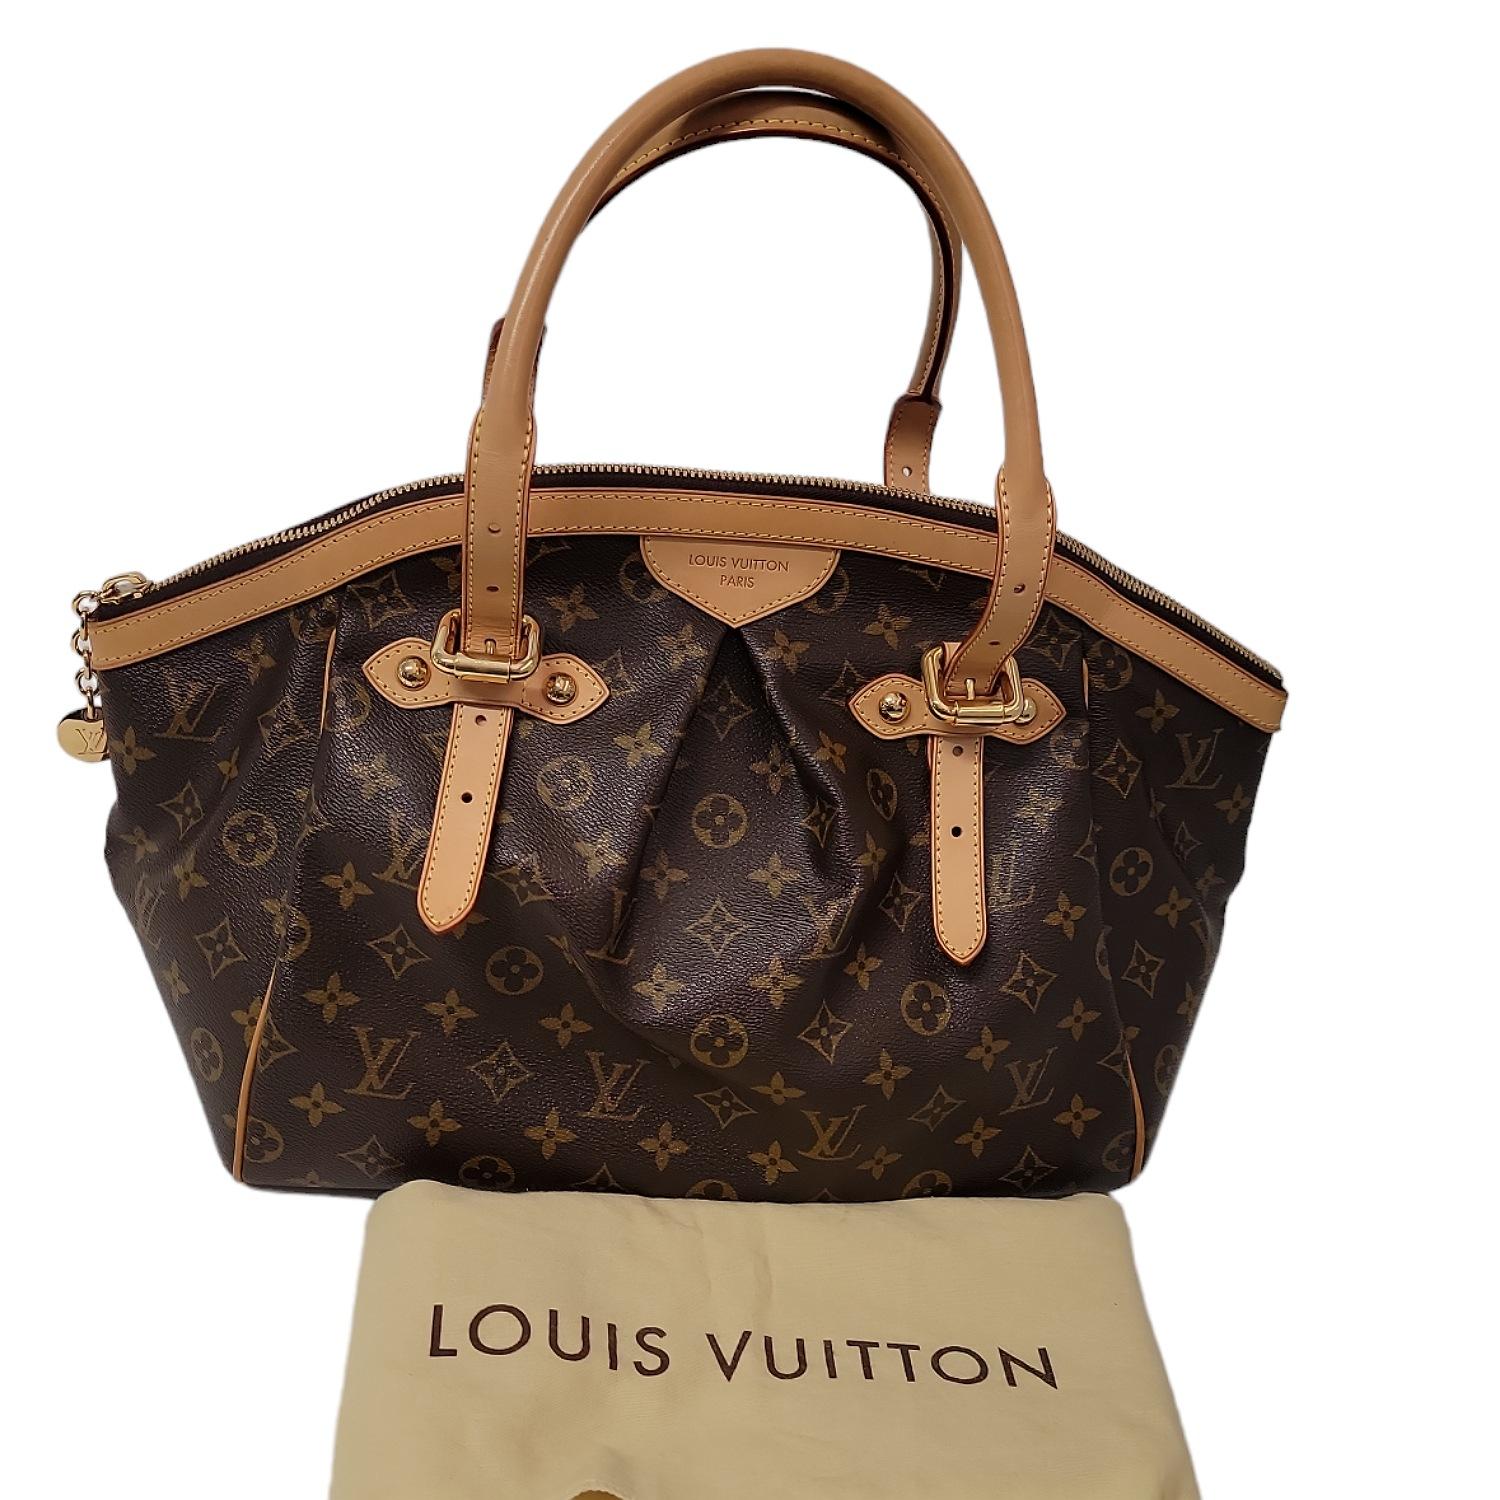 This unique Louis Vuitton Monogram Canvas Tivoli GM Bag is the one for you. The Tivoli, whose name was inspired by the famous city of Tivoli, Italy, features stylish details such as an inverted pleating, a frame top and a gold-tone zipper LV pull.